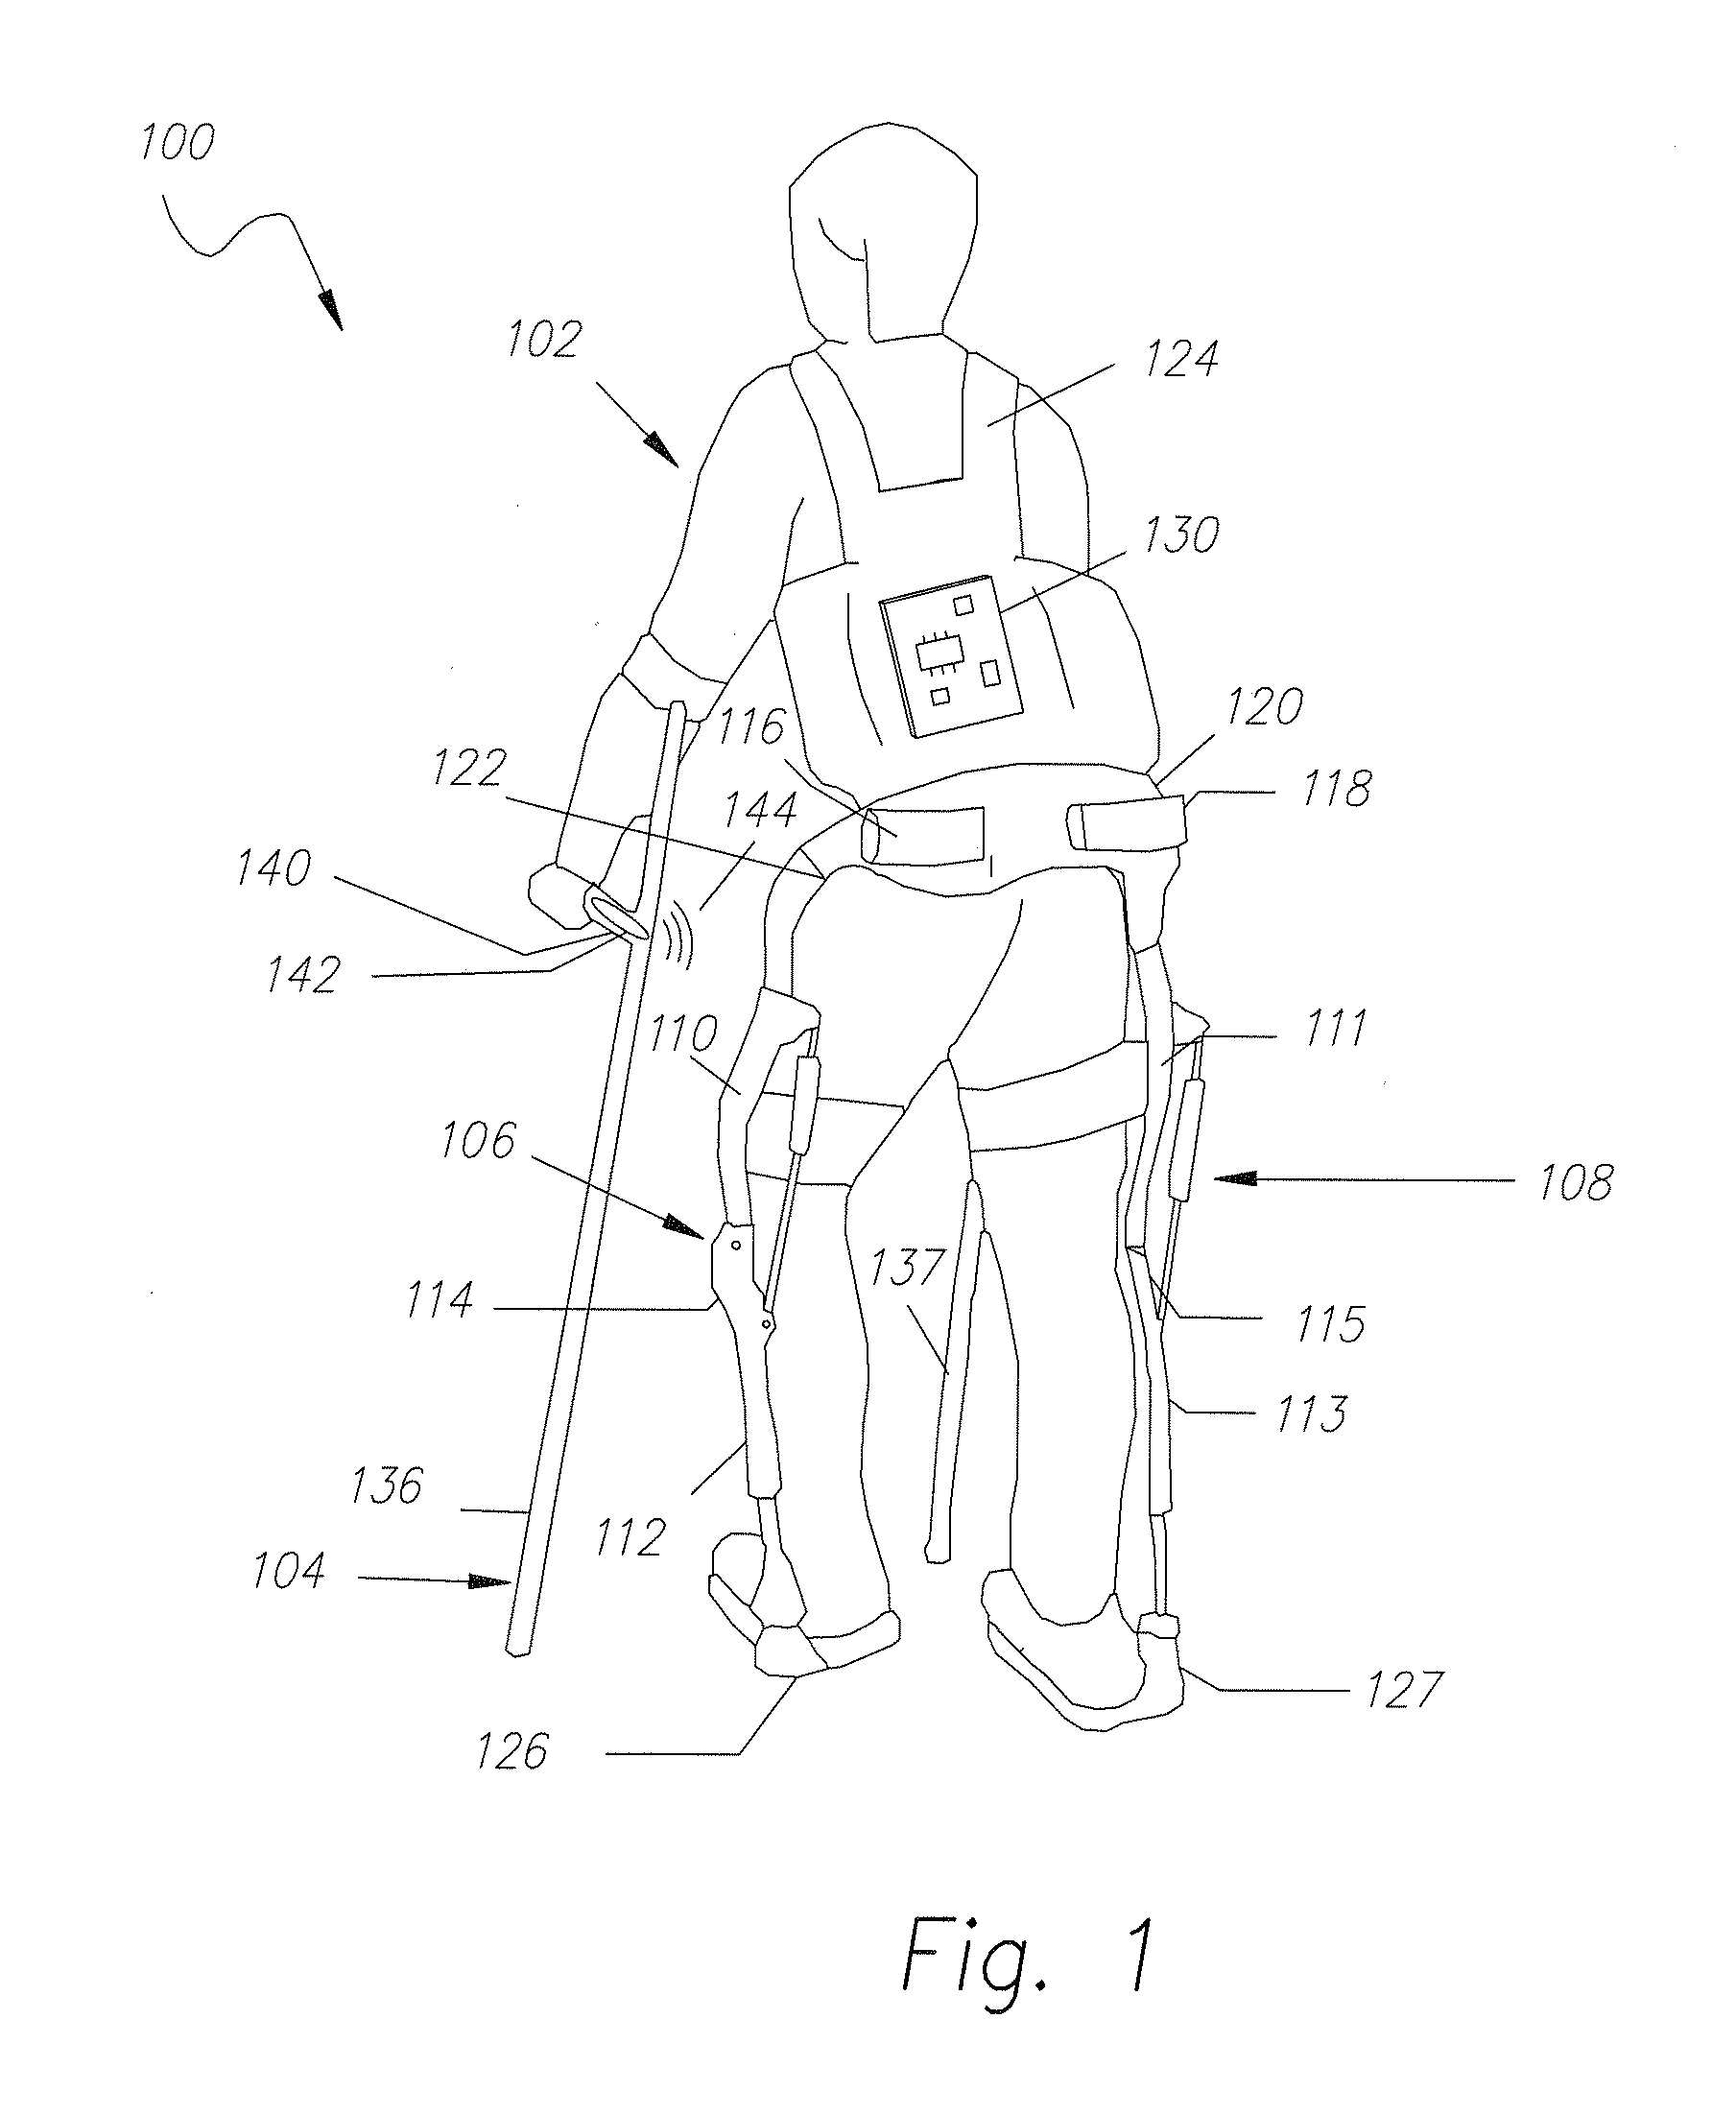 Orthesis system and methods for control of exoskeletons